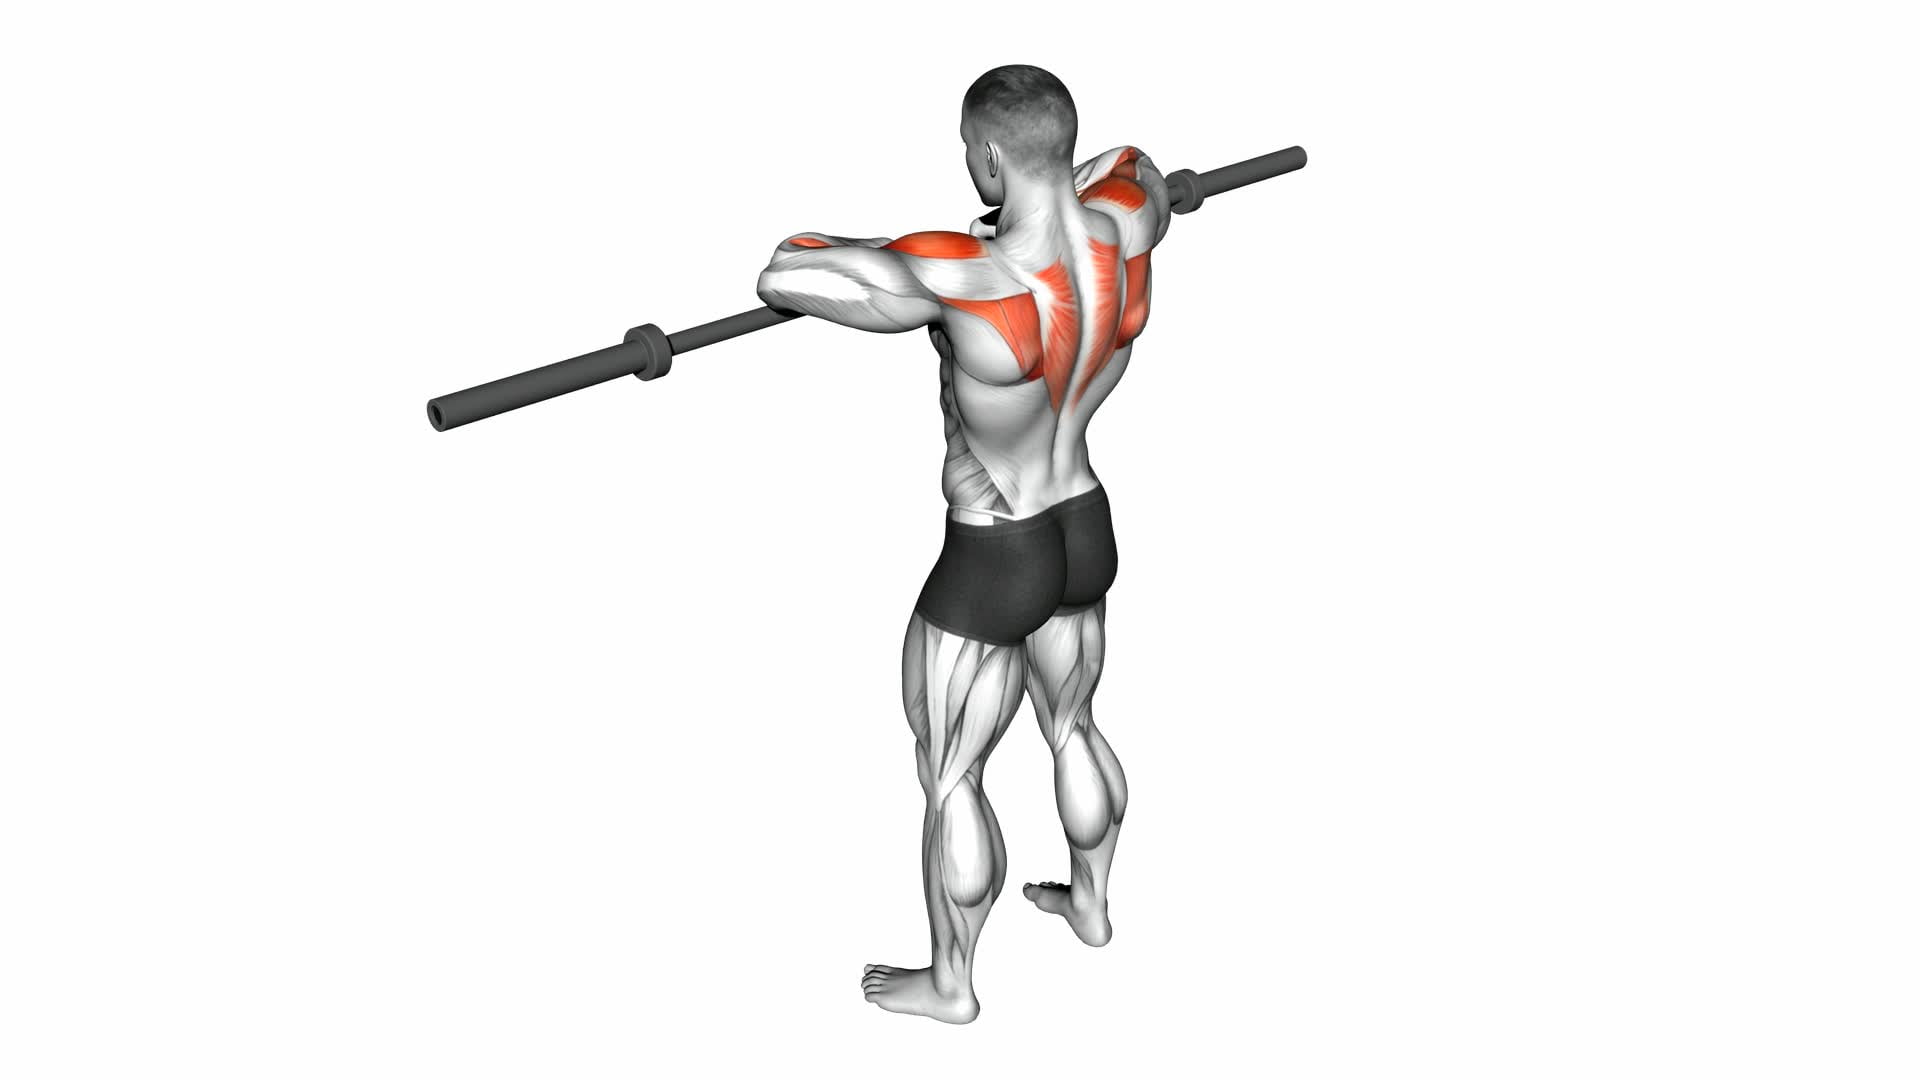 Barbell Upright Row - Video Exercise Guide & Tips